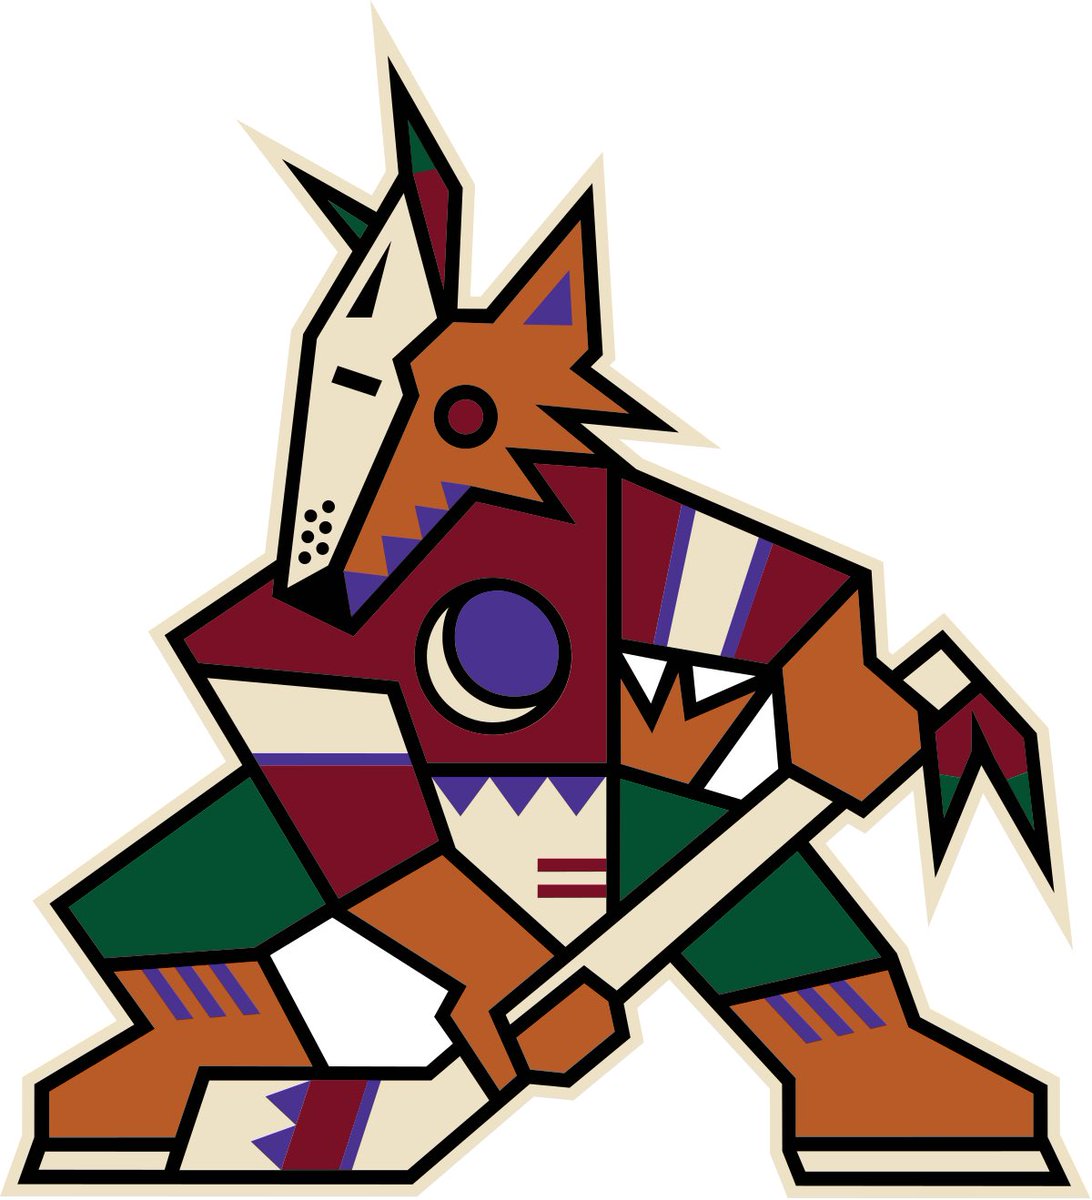 Utah is getting the nhl team with the coolest fucking logo and an appropriate name for an slc team and they’re gonna rename it to something stupid I just know it. Look at this guy that’s the coolest shit ever